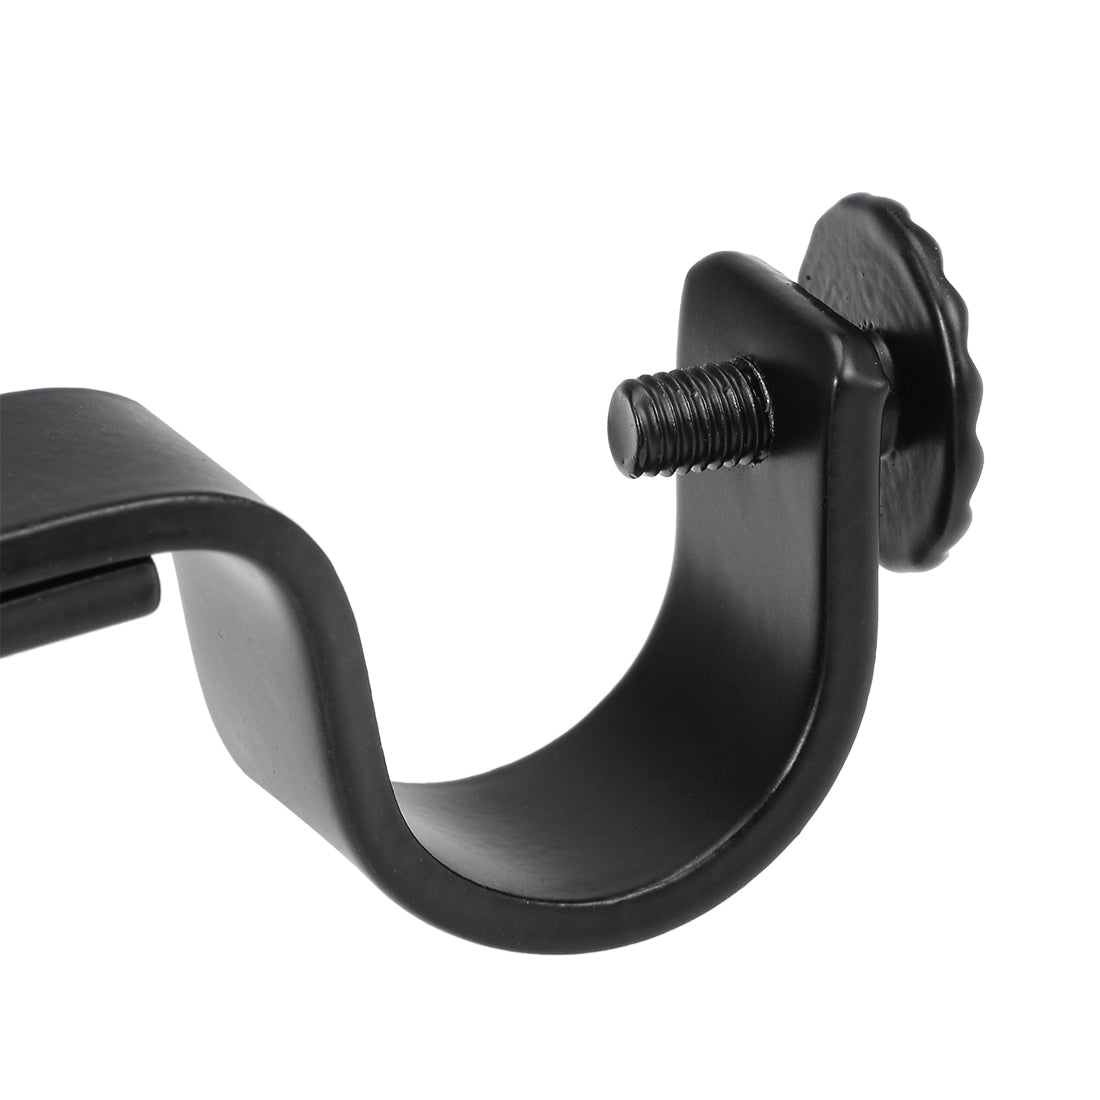 uxcell Uxcell Curtain Rod Bracket Iron Single Holder Support for 22mm Drapery Rod, 94 x 46 x 16mm Black